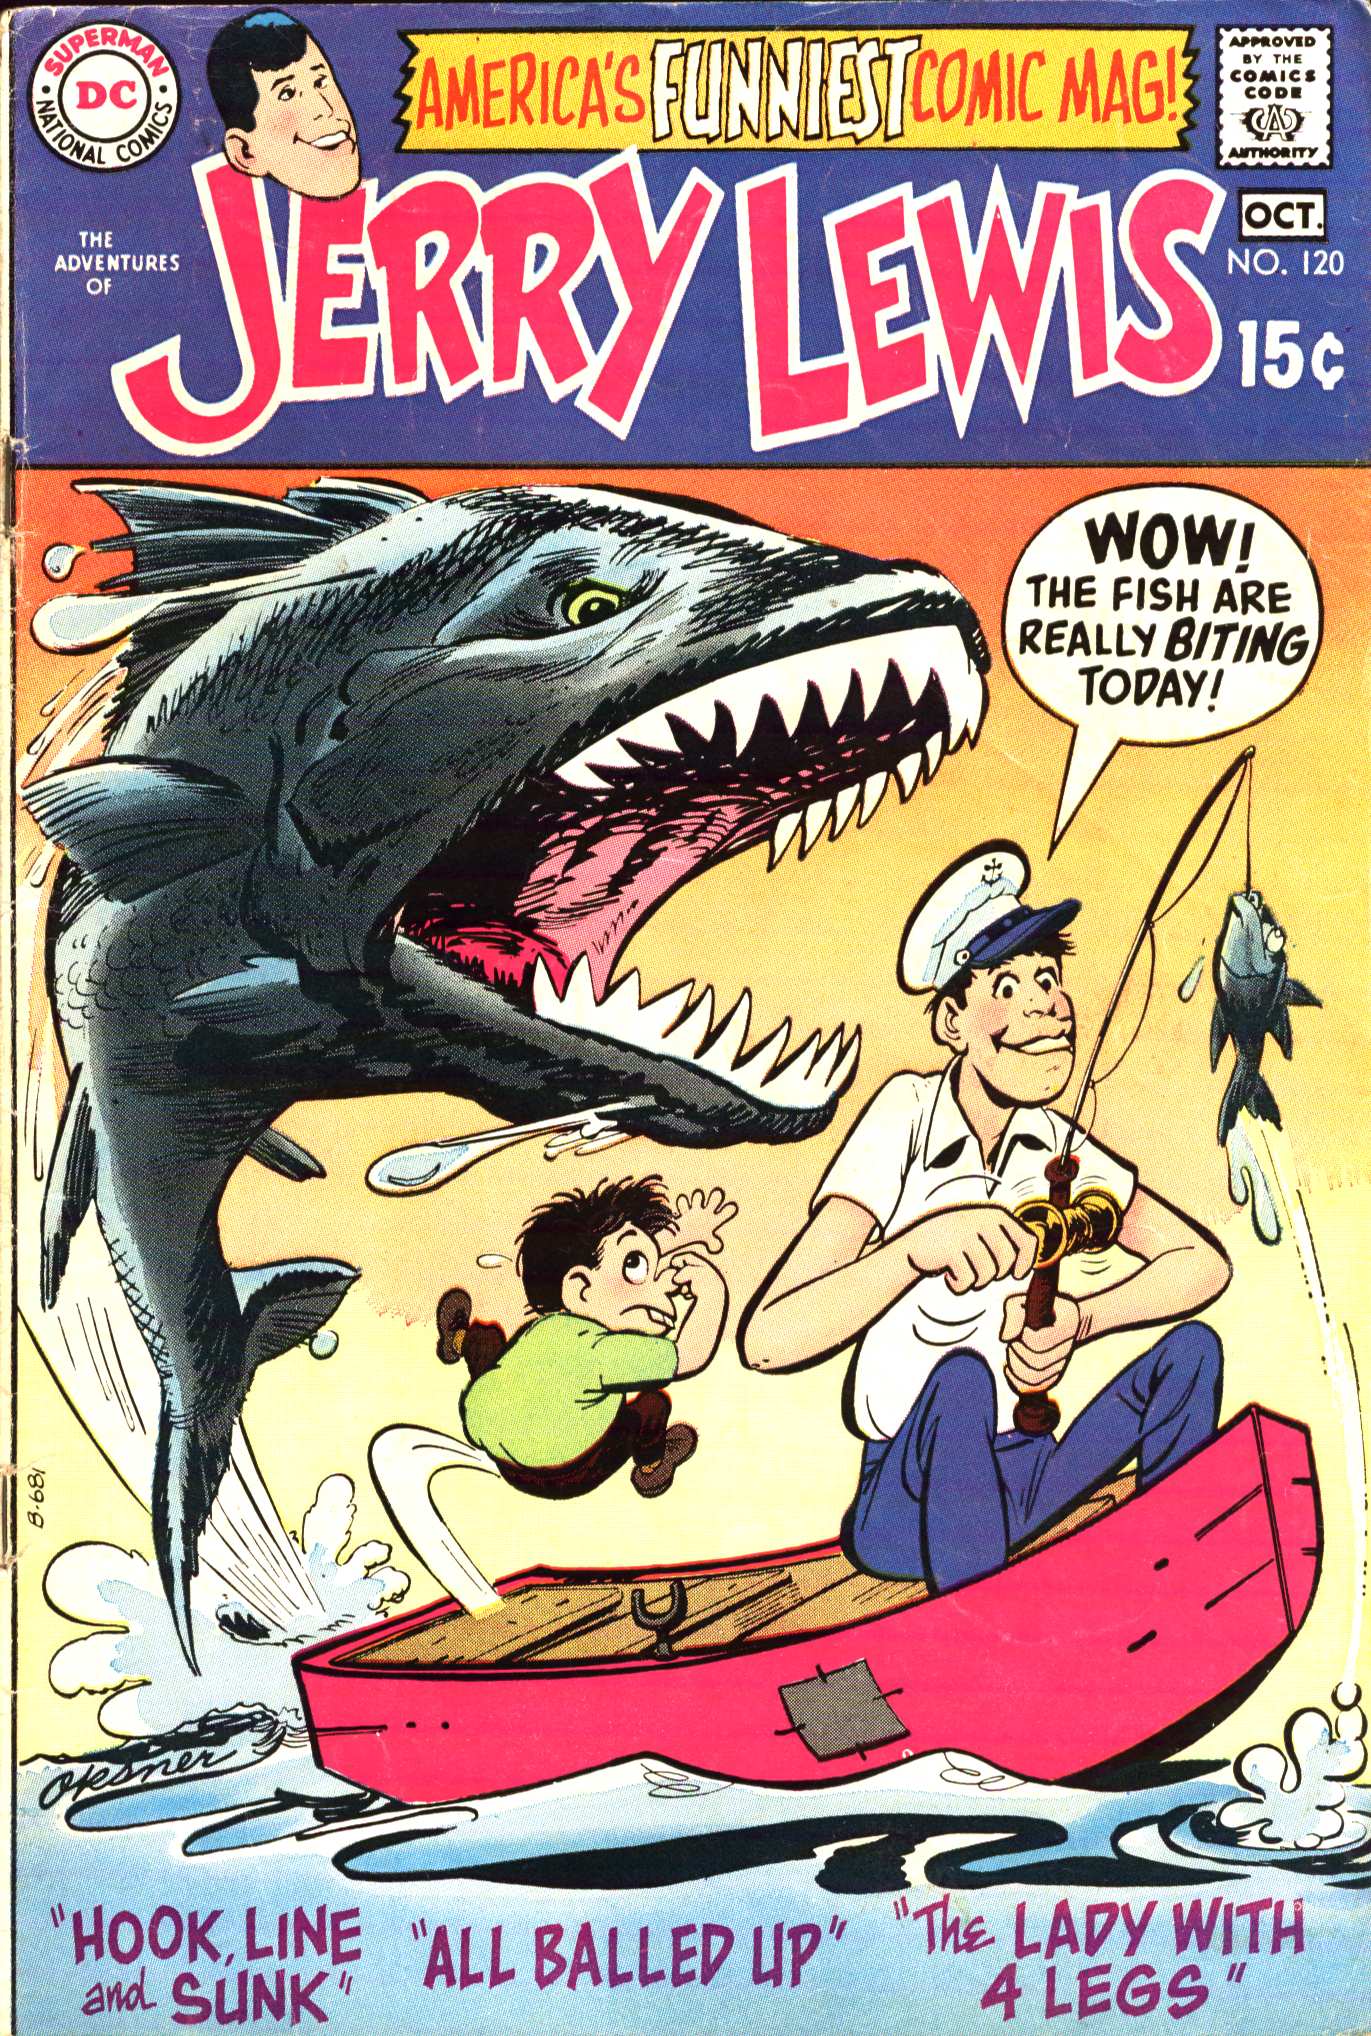 Read online The Adventures of Jerry Lewis comic -  Issue #120 - 1